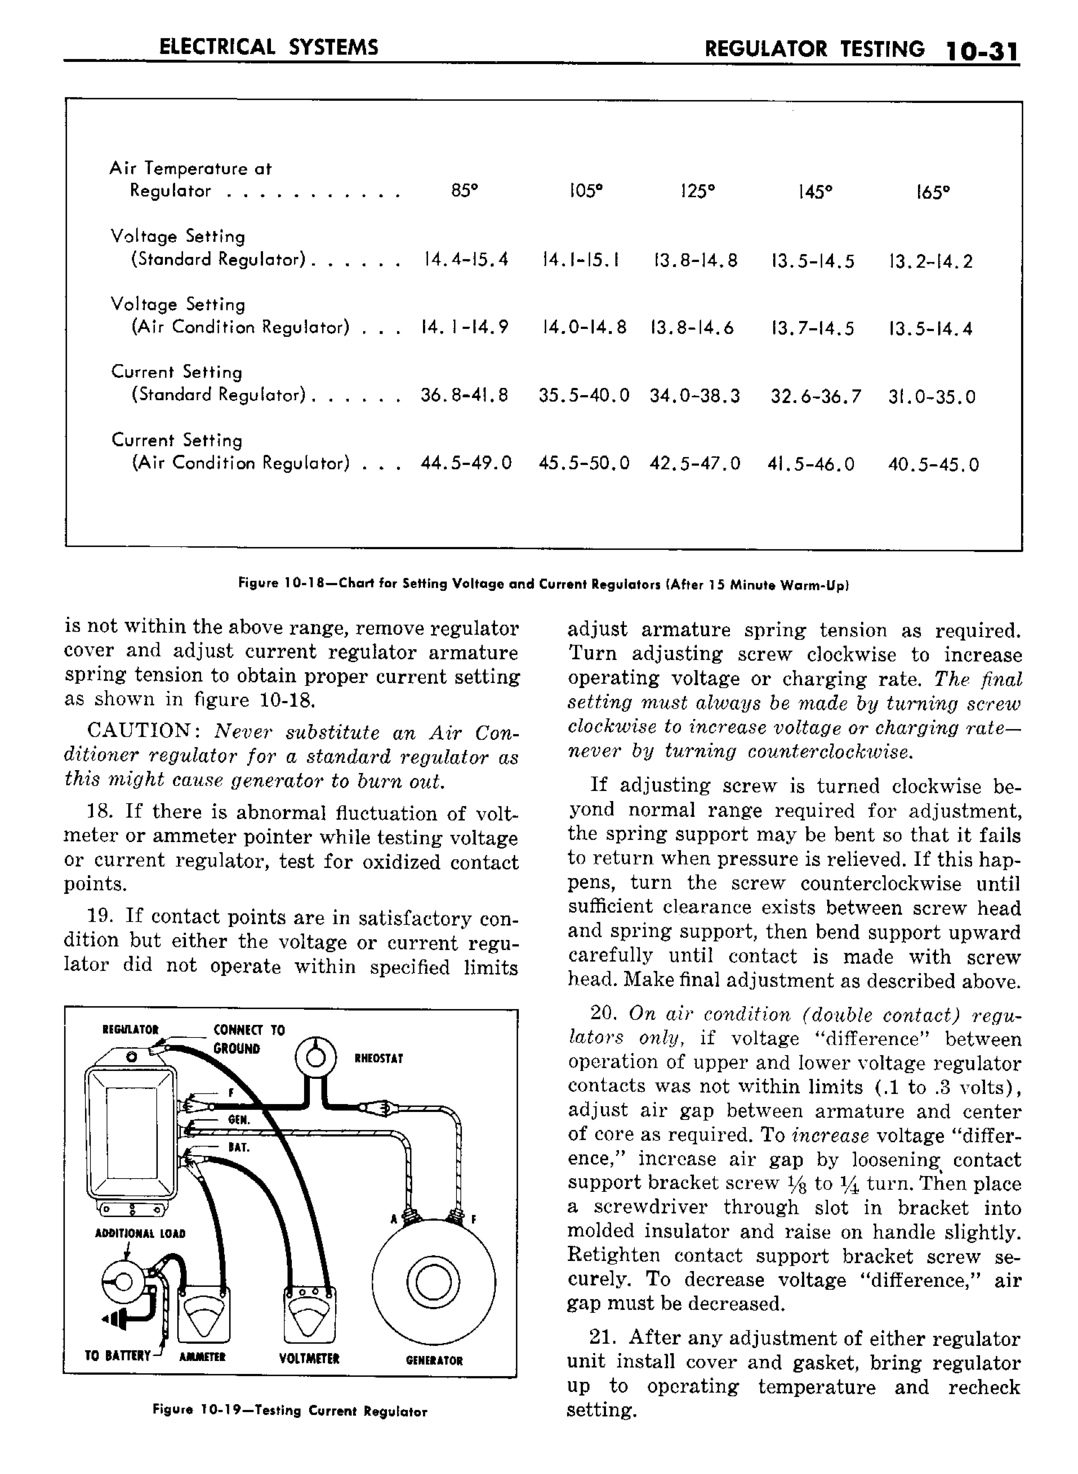 n_11 1960 Buick Shop Manual - Electrical Systems-031-031.jpg